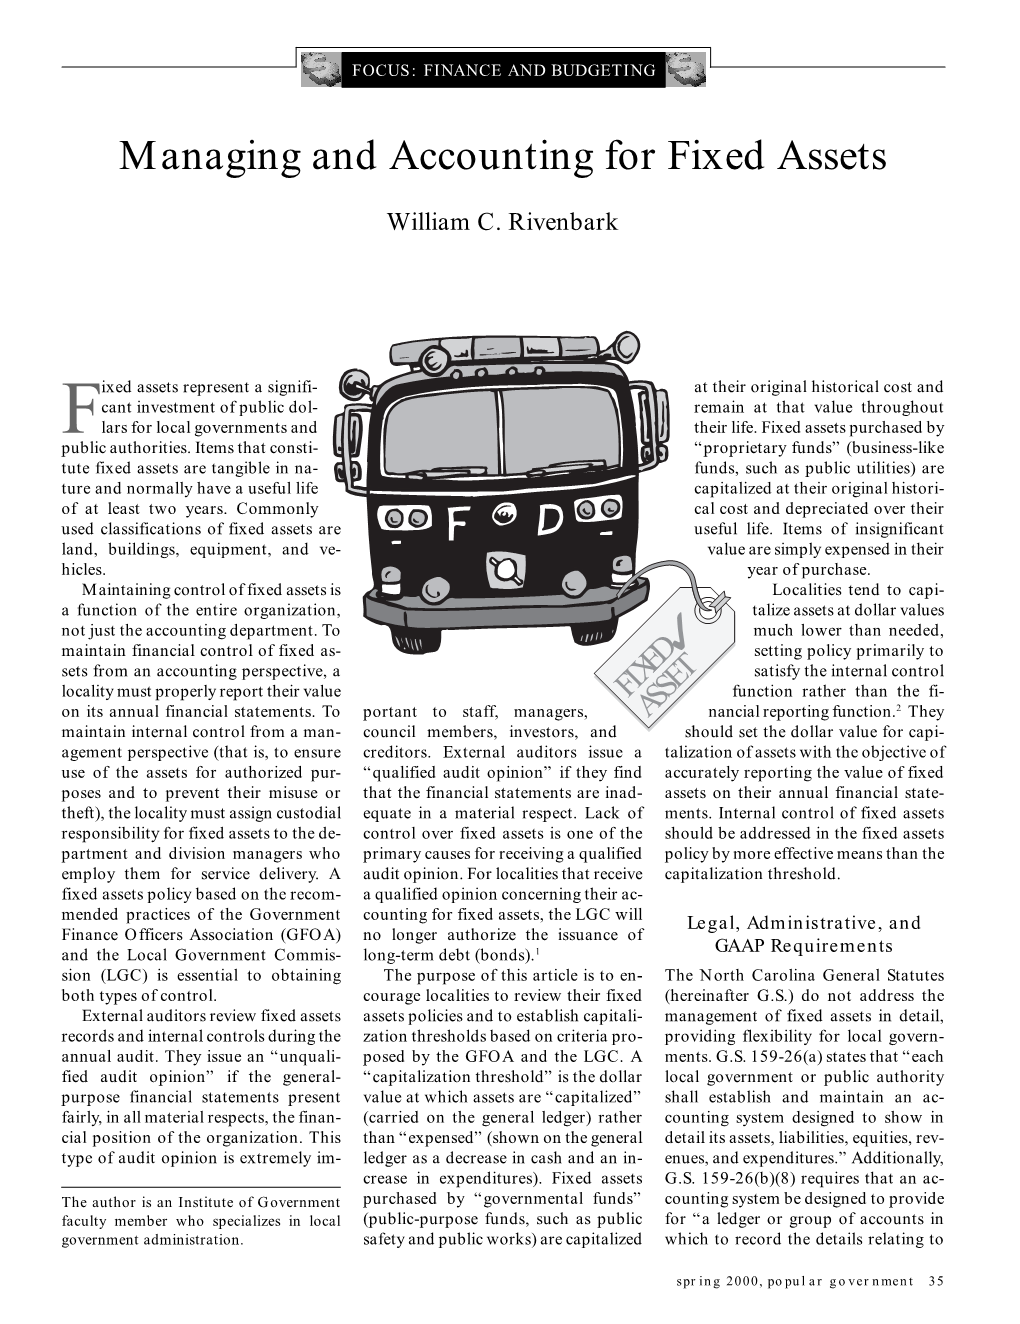 Managing and Accounting for Fixed Assets